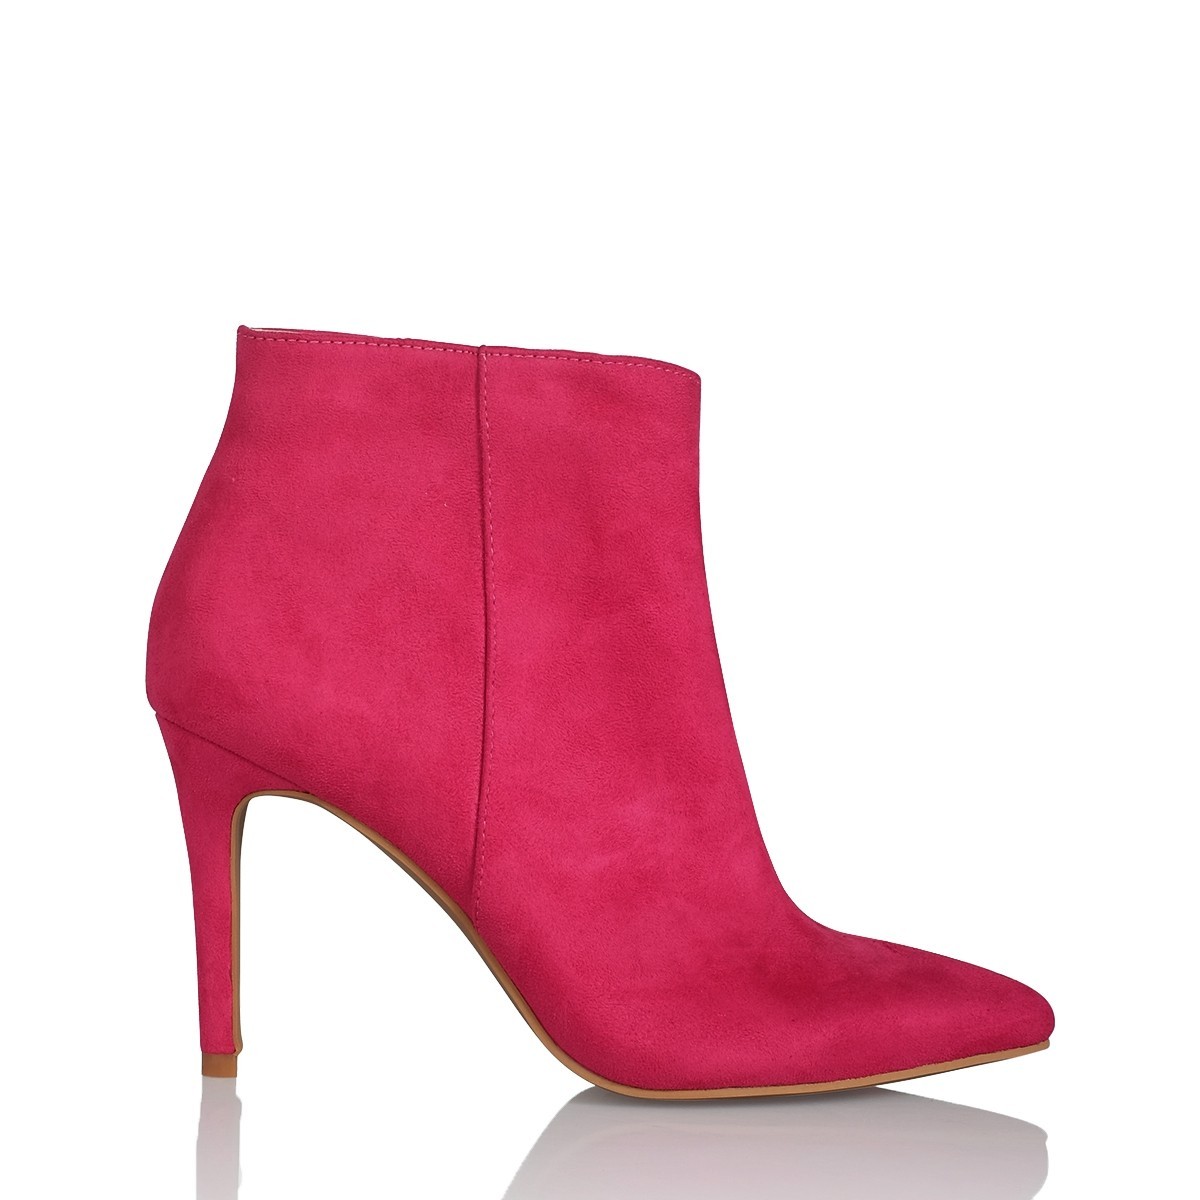 Nada Fuchsia Suede by Billini Shoes on Sale | ShoeSales